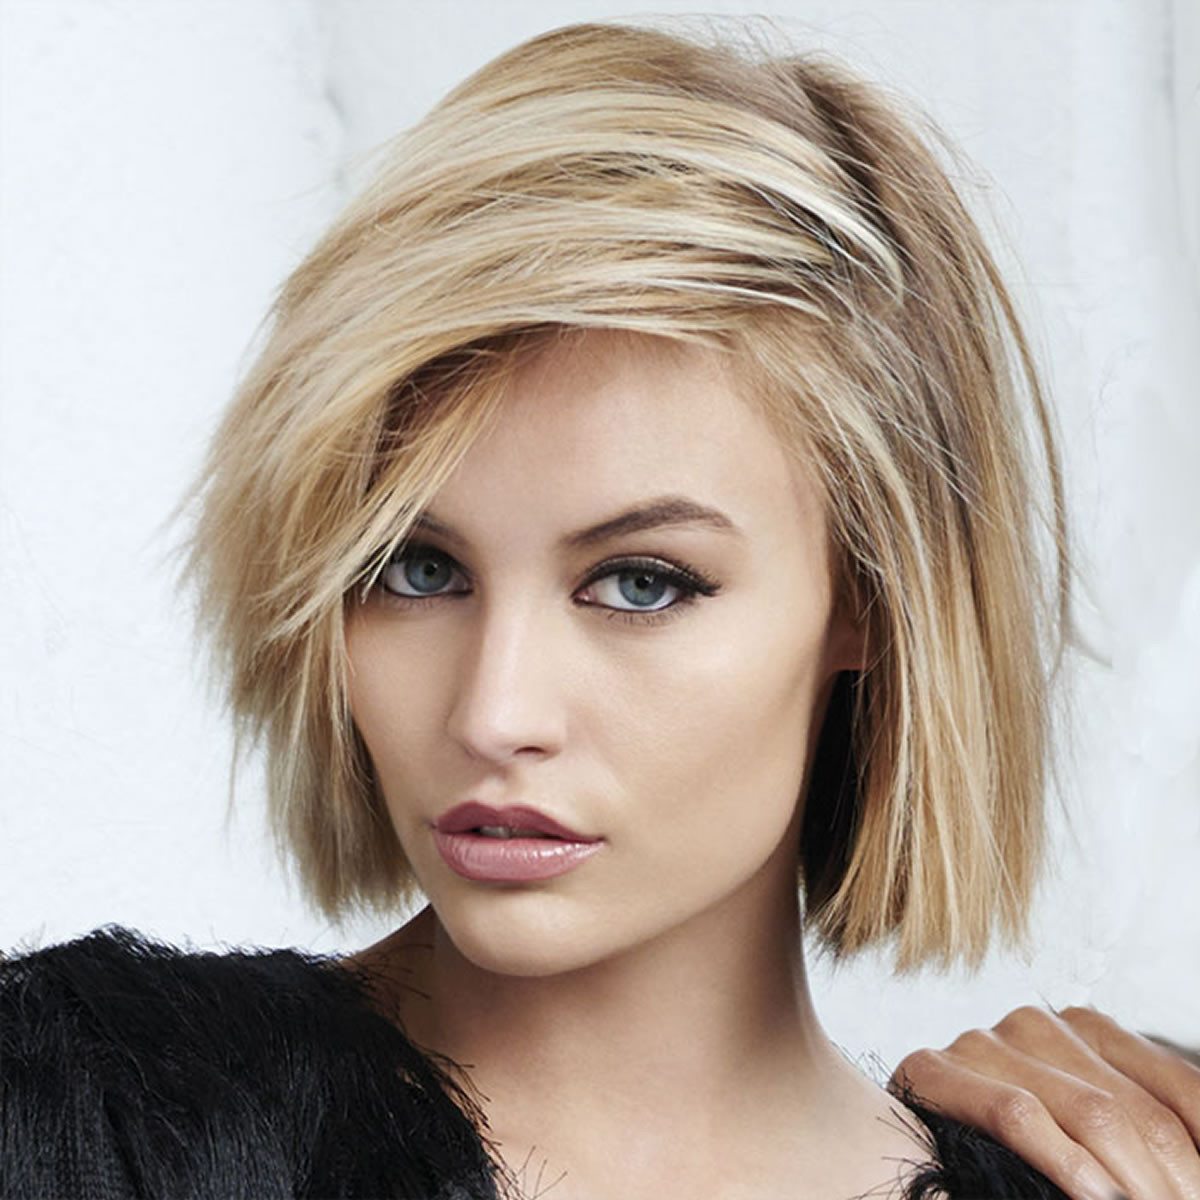 Hairstyles Short Bob
 The Best 33 Short Bob Haircuts – 2019 Short Hairstyles for